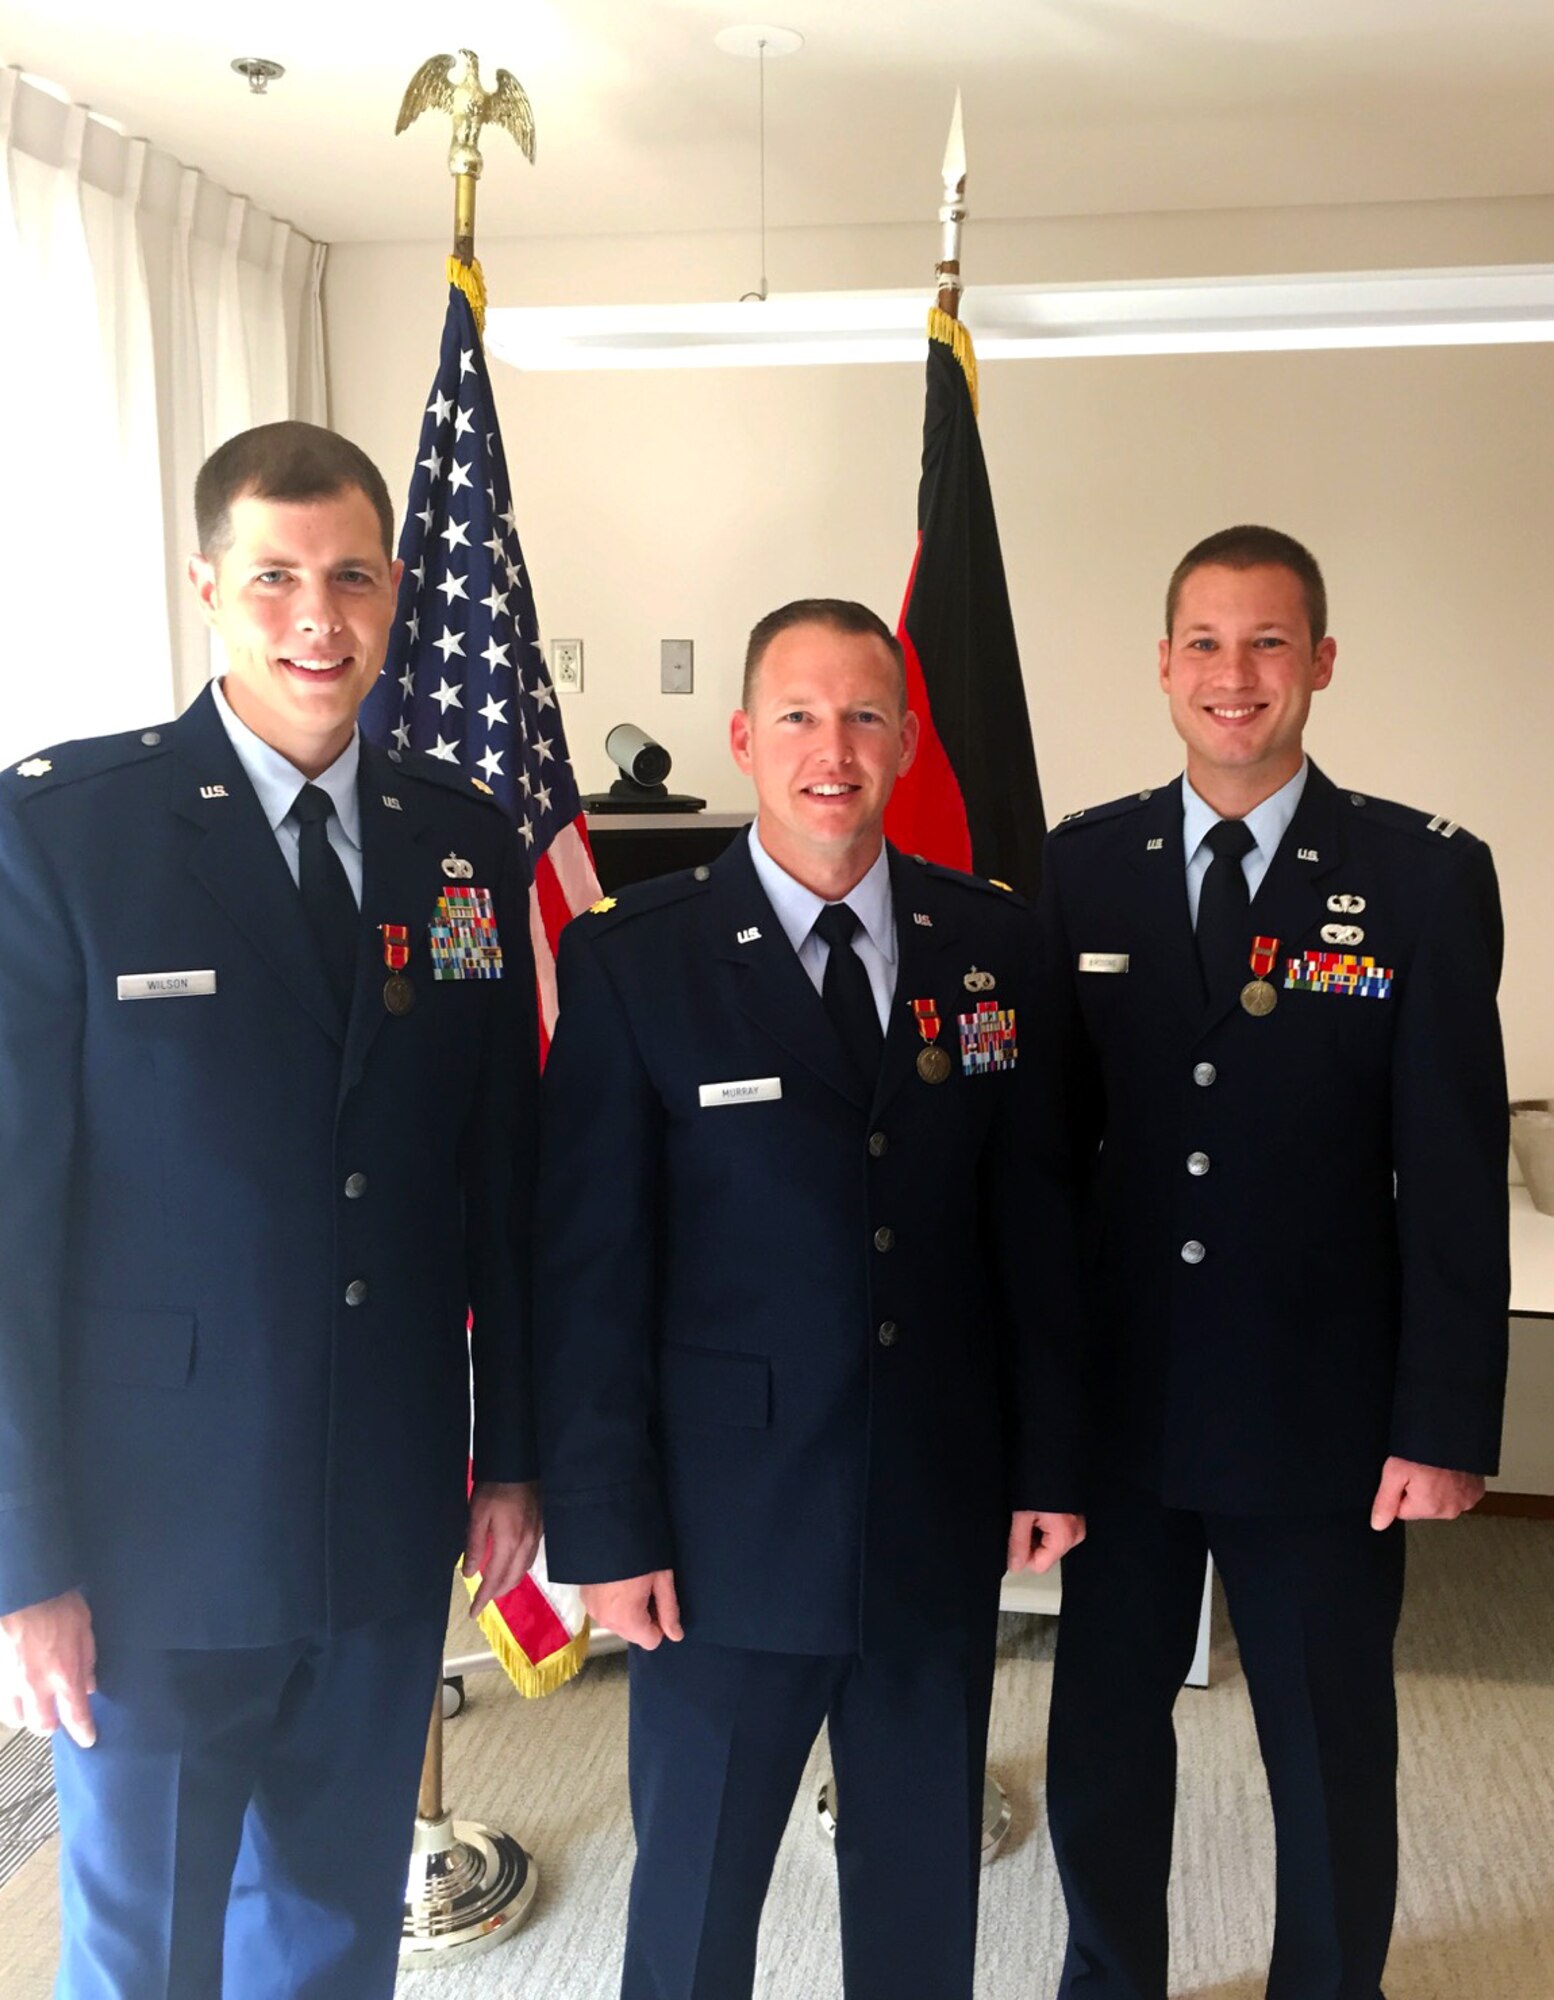 Maj. Ryan Murray, 341st Logistics Readiness Squadron commander at Malmstrom Air Force Base, Mont., was awarded the Bronze Foreign Duty Medal of the Federal Armed Forces on behalf of the Federal Republic of Germany Jan. 6, 2015. Murray, center, received the medal along with his team members, Maj. Joseph Wilson, left and Capt. Eric Birdsong, right, for work in a joint coalition task force in Kabul advising national level logistics for the Afghanistan Army and Police. (Courtesy photo)